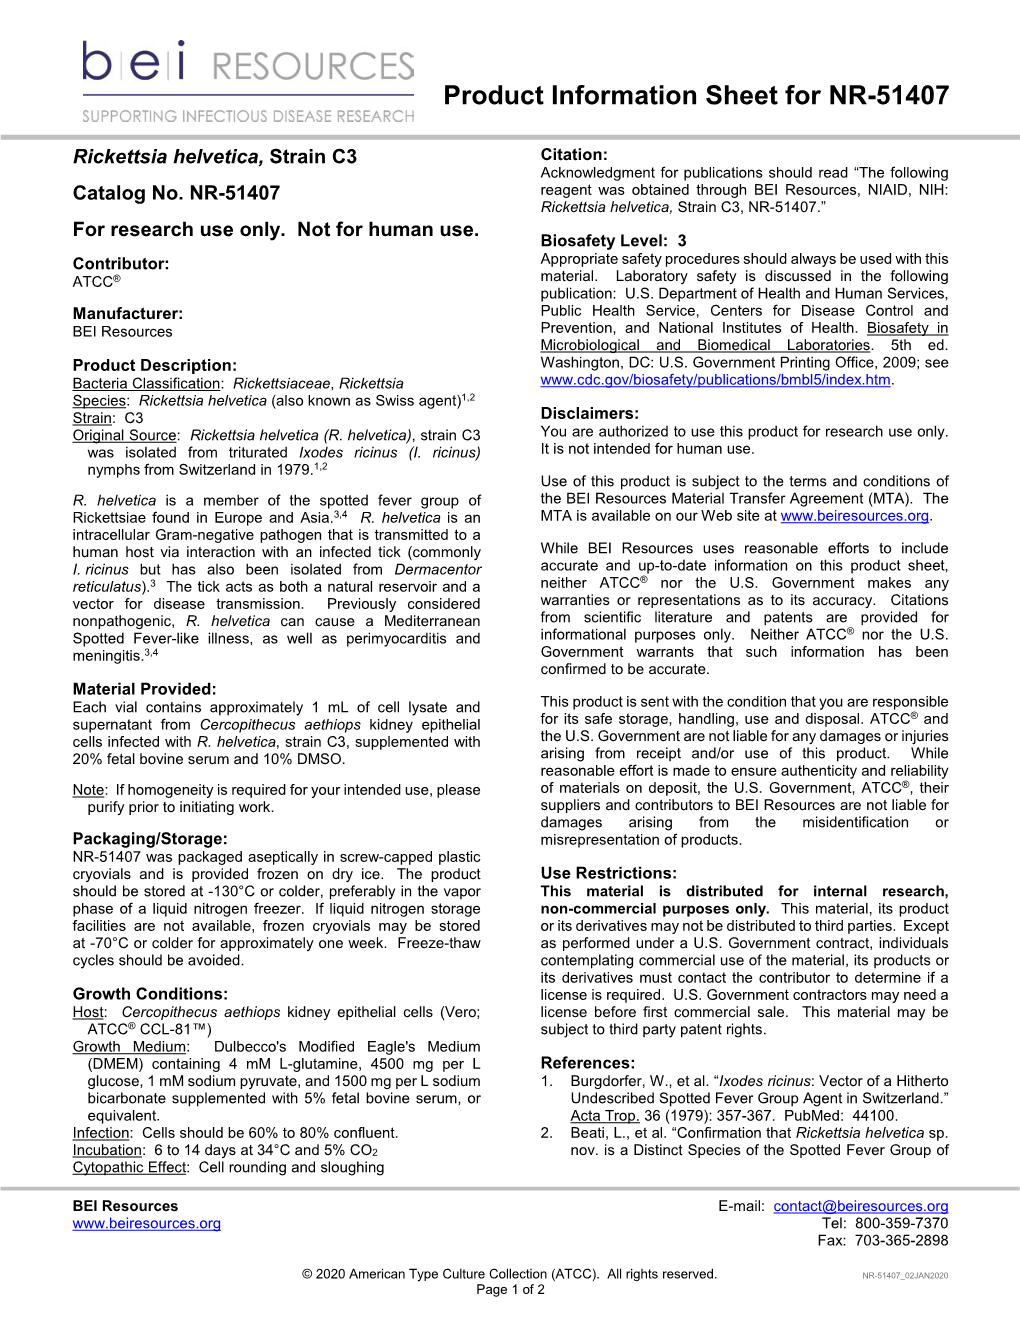 BEI Resources Product Information Sheet Catalog No. NR-51407 Rickettsia Helvetica, Strain C3